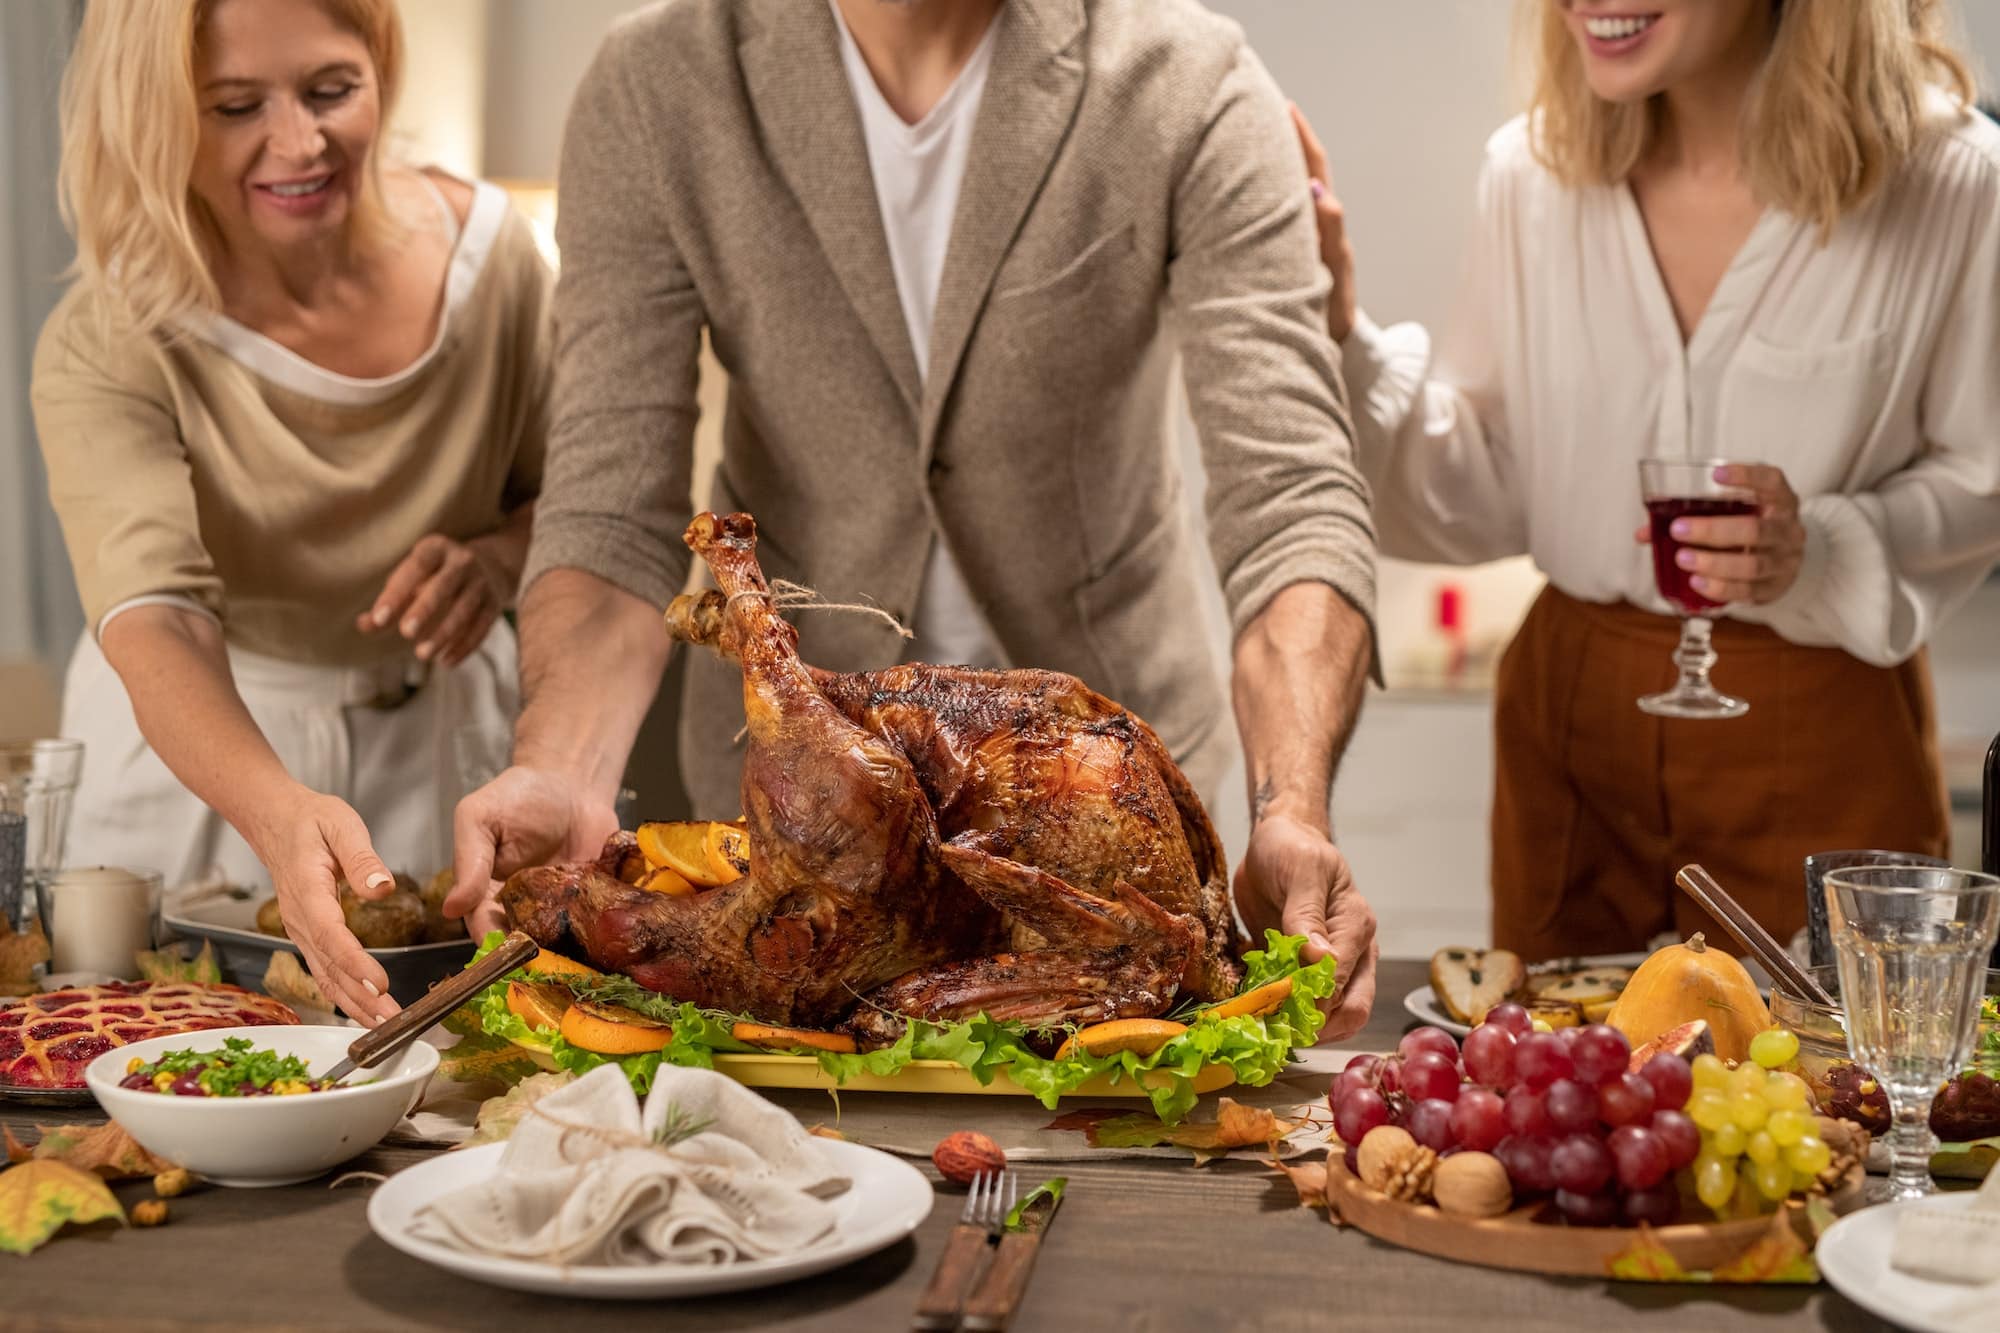 Young and mature females surrounding man putting big roasted turkey on table